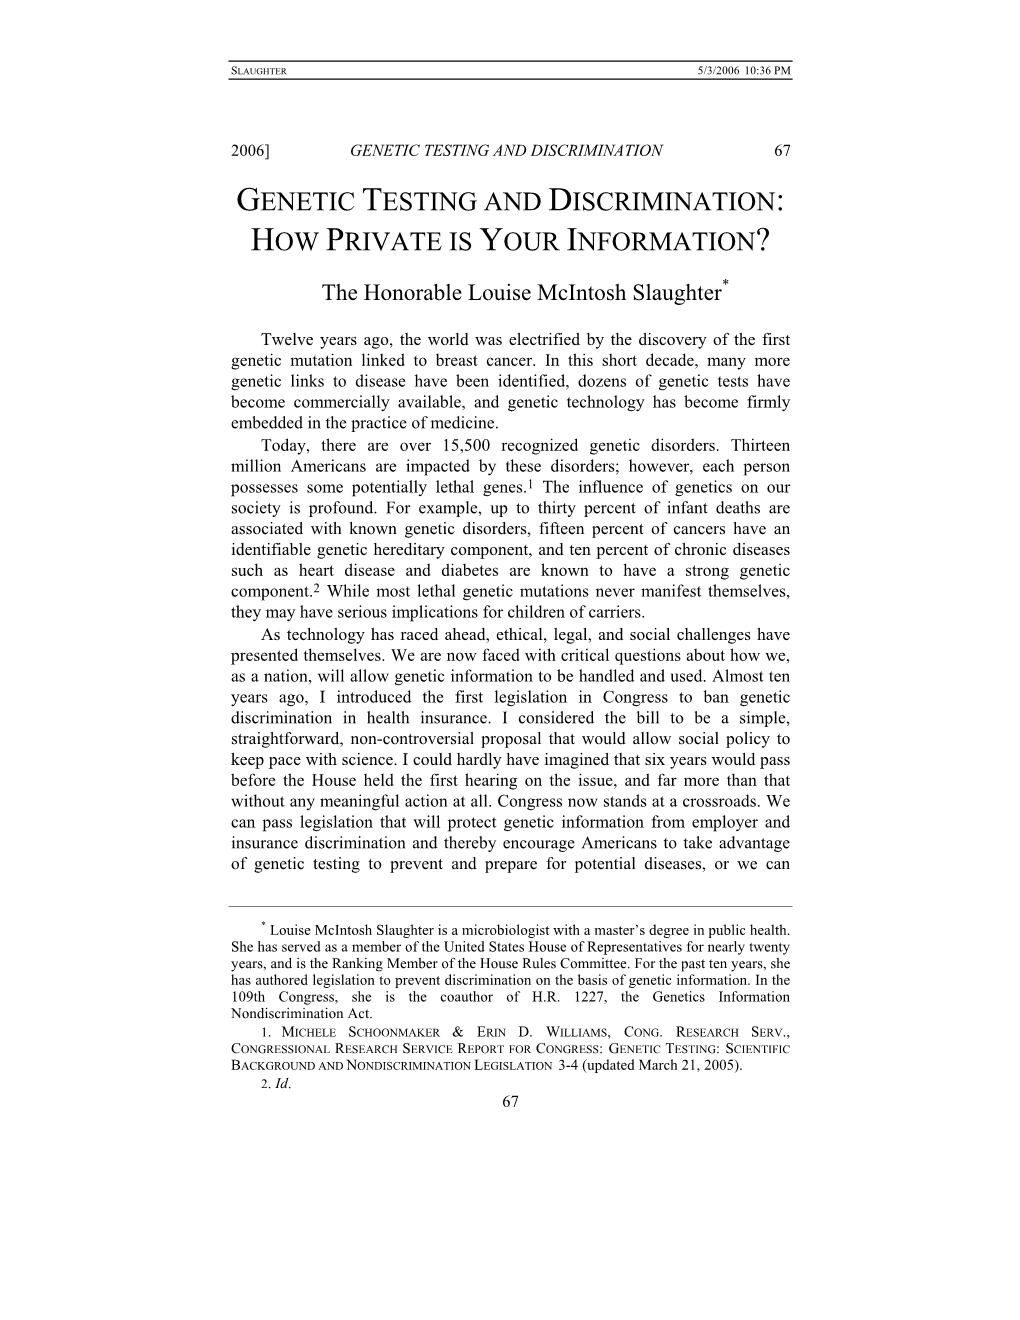 Genetic Testing and Discrimination 67